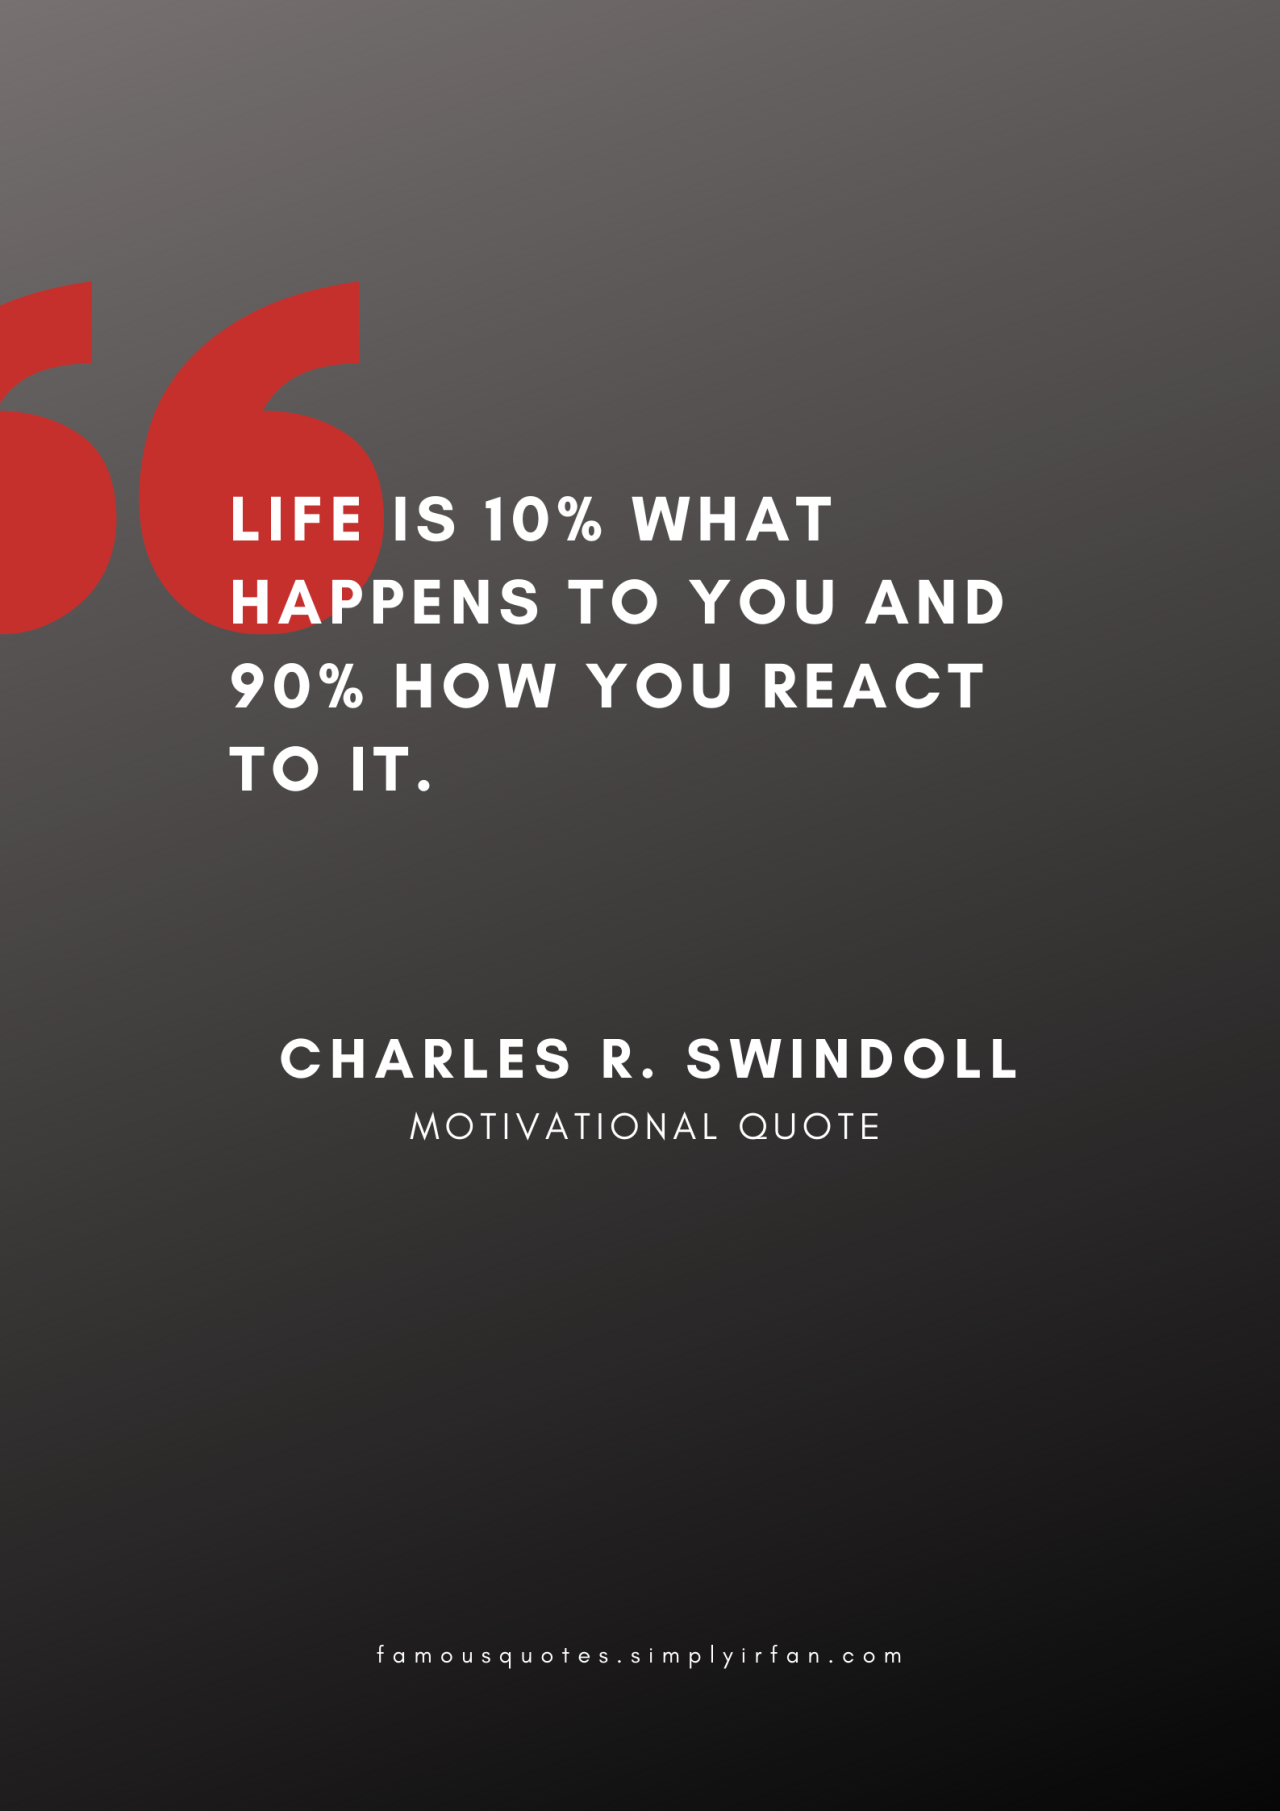 Life is 10% what happens to you and 90% how you react to it. Quote by Charles R. Swindoll